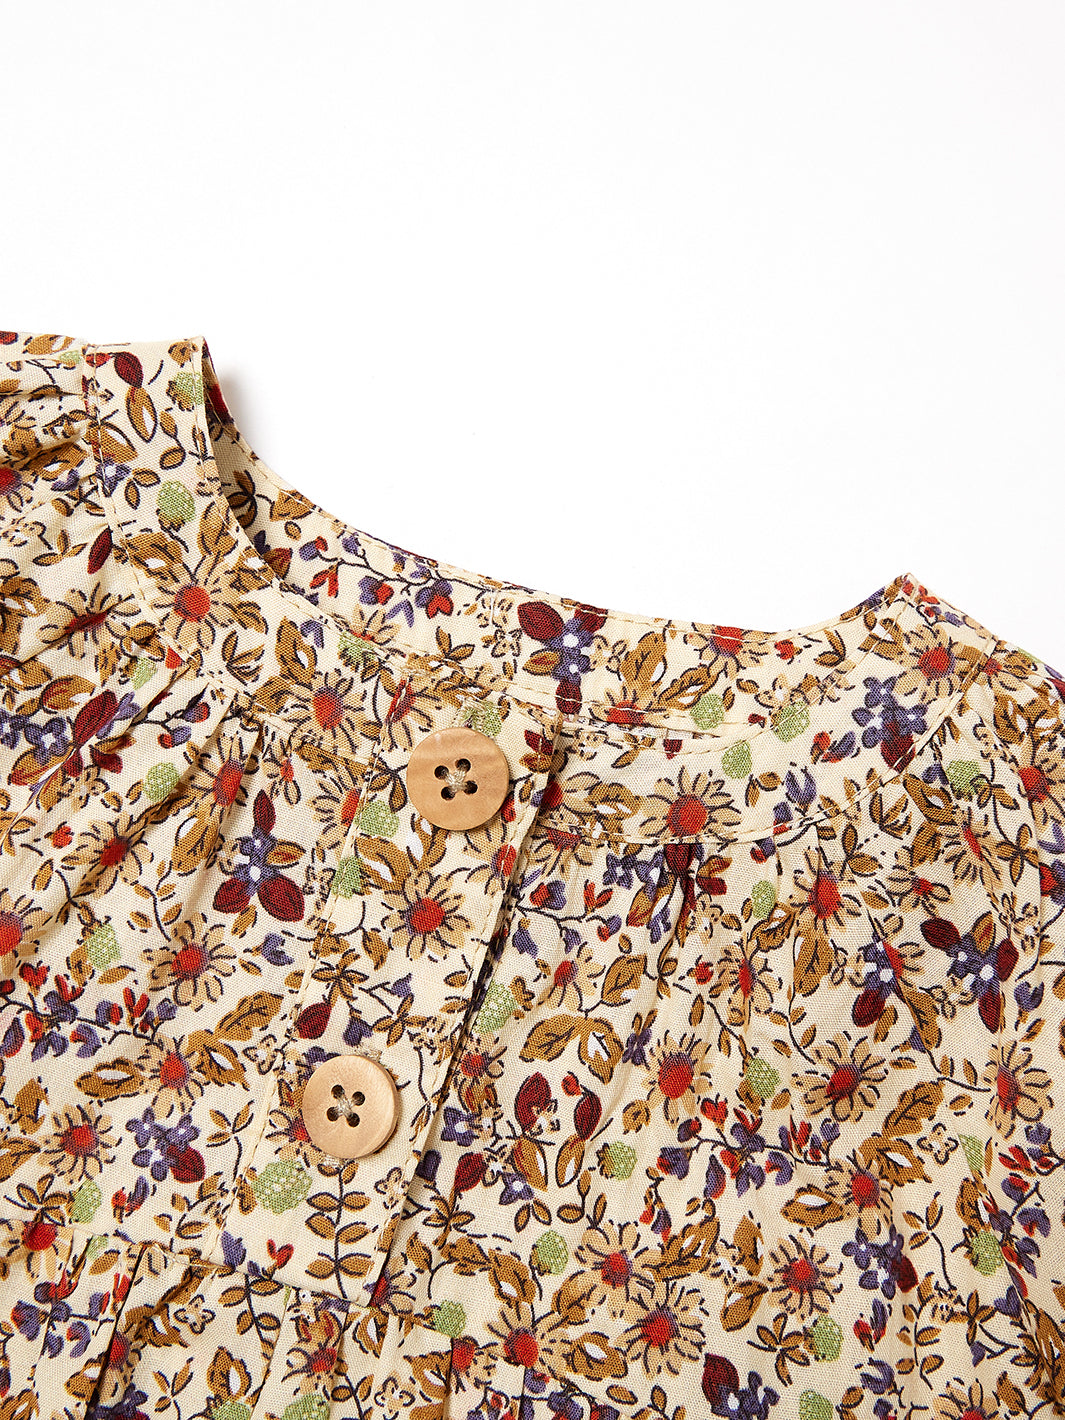 Floral Gathers Top - Beige